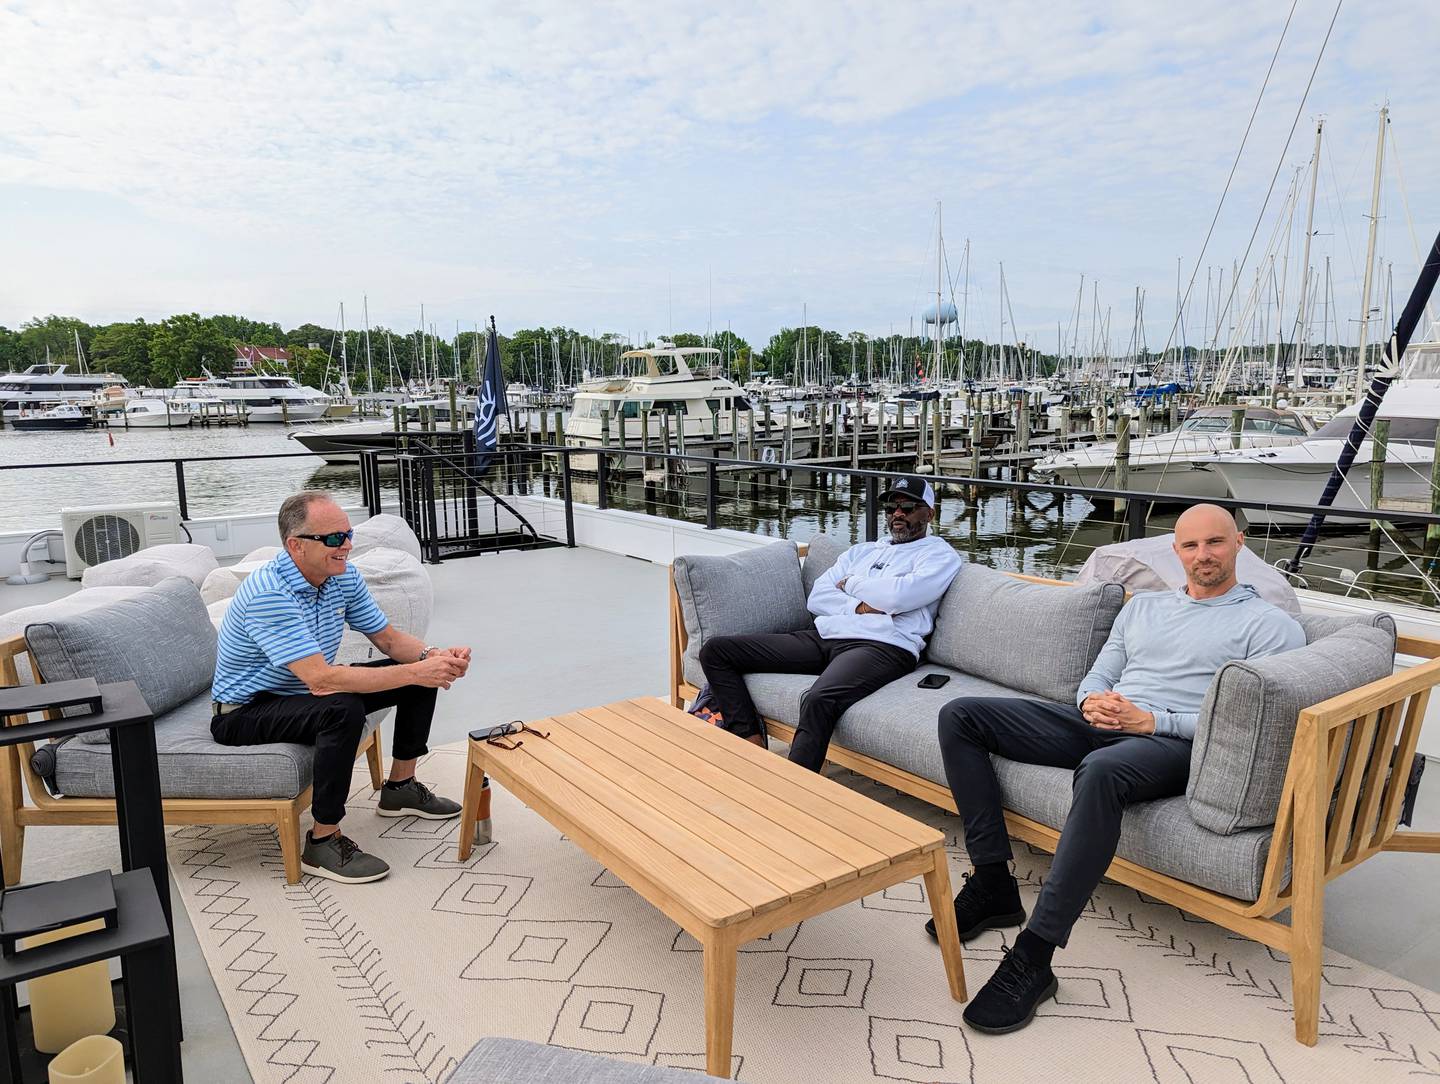 Partners in Flohom, from left, Jerry South, Marcellus Butler and Brian Meyer, talk about the launch of their hotel concept atop their first floating room in Annapolis.